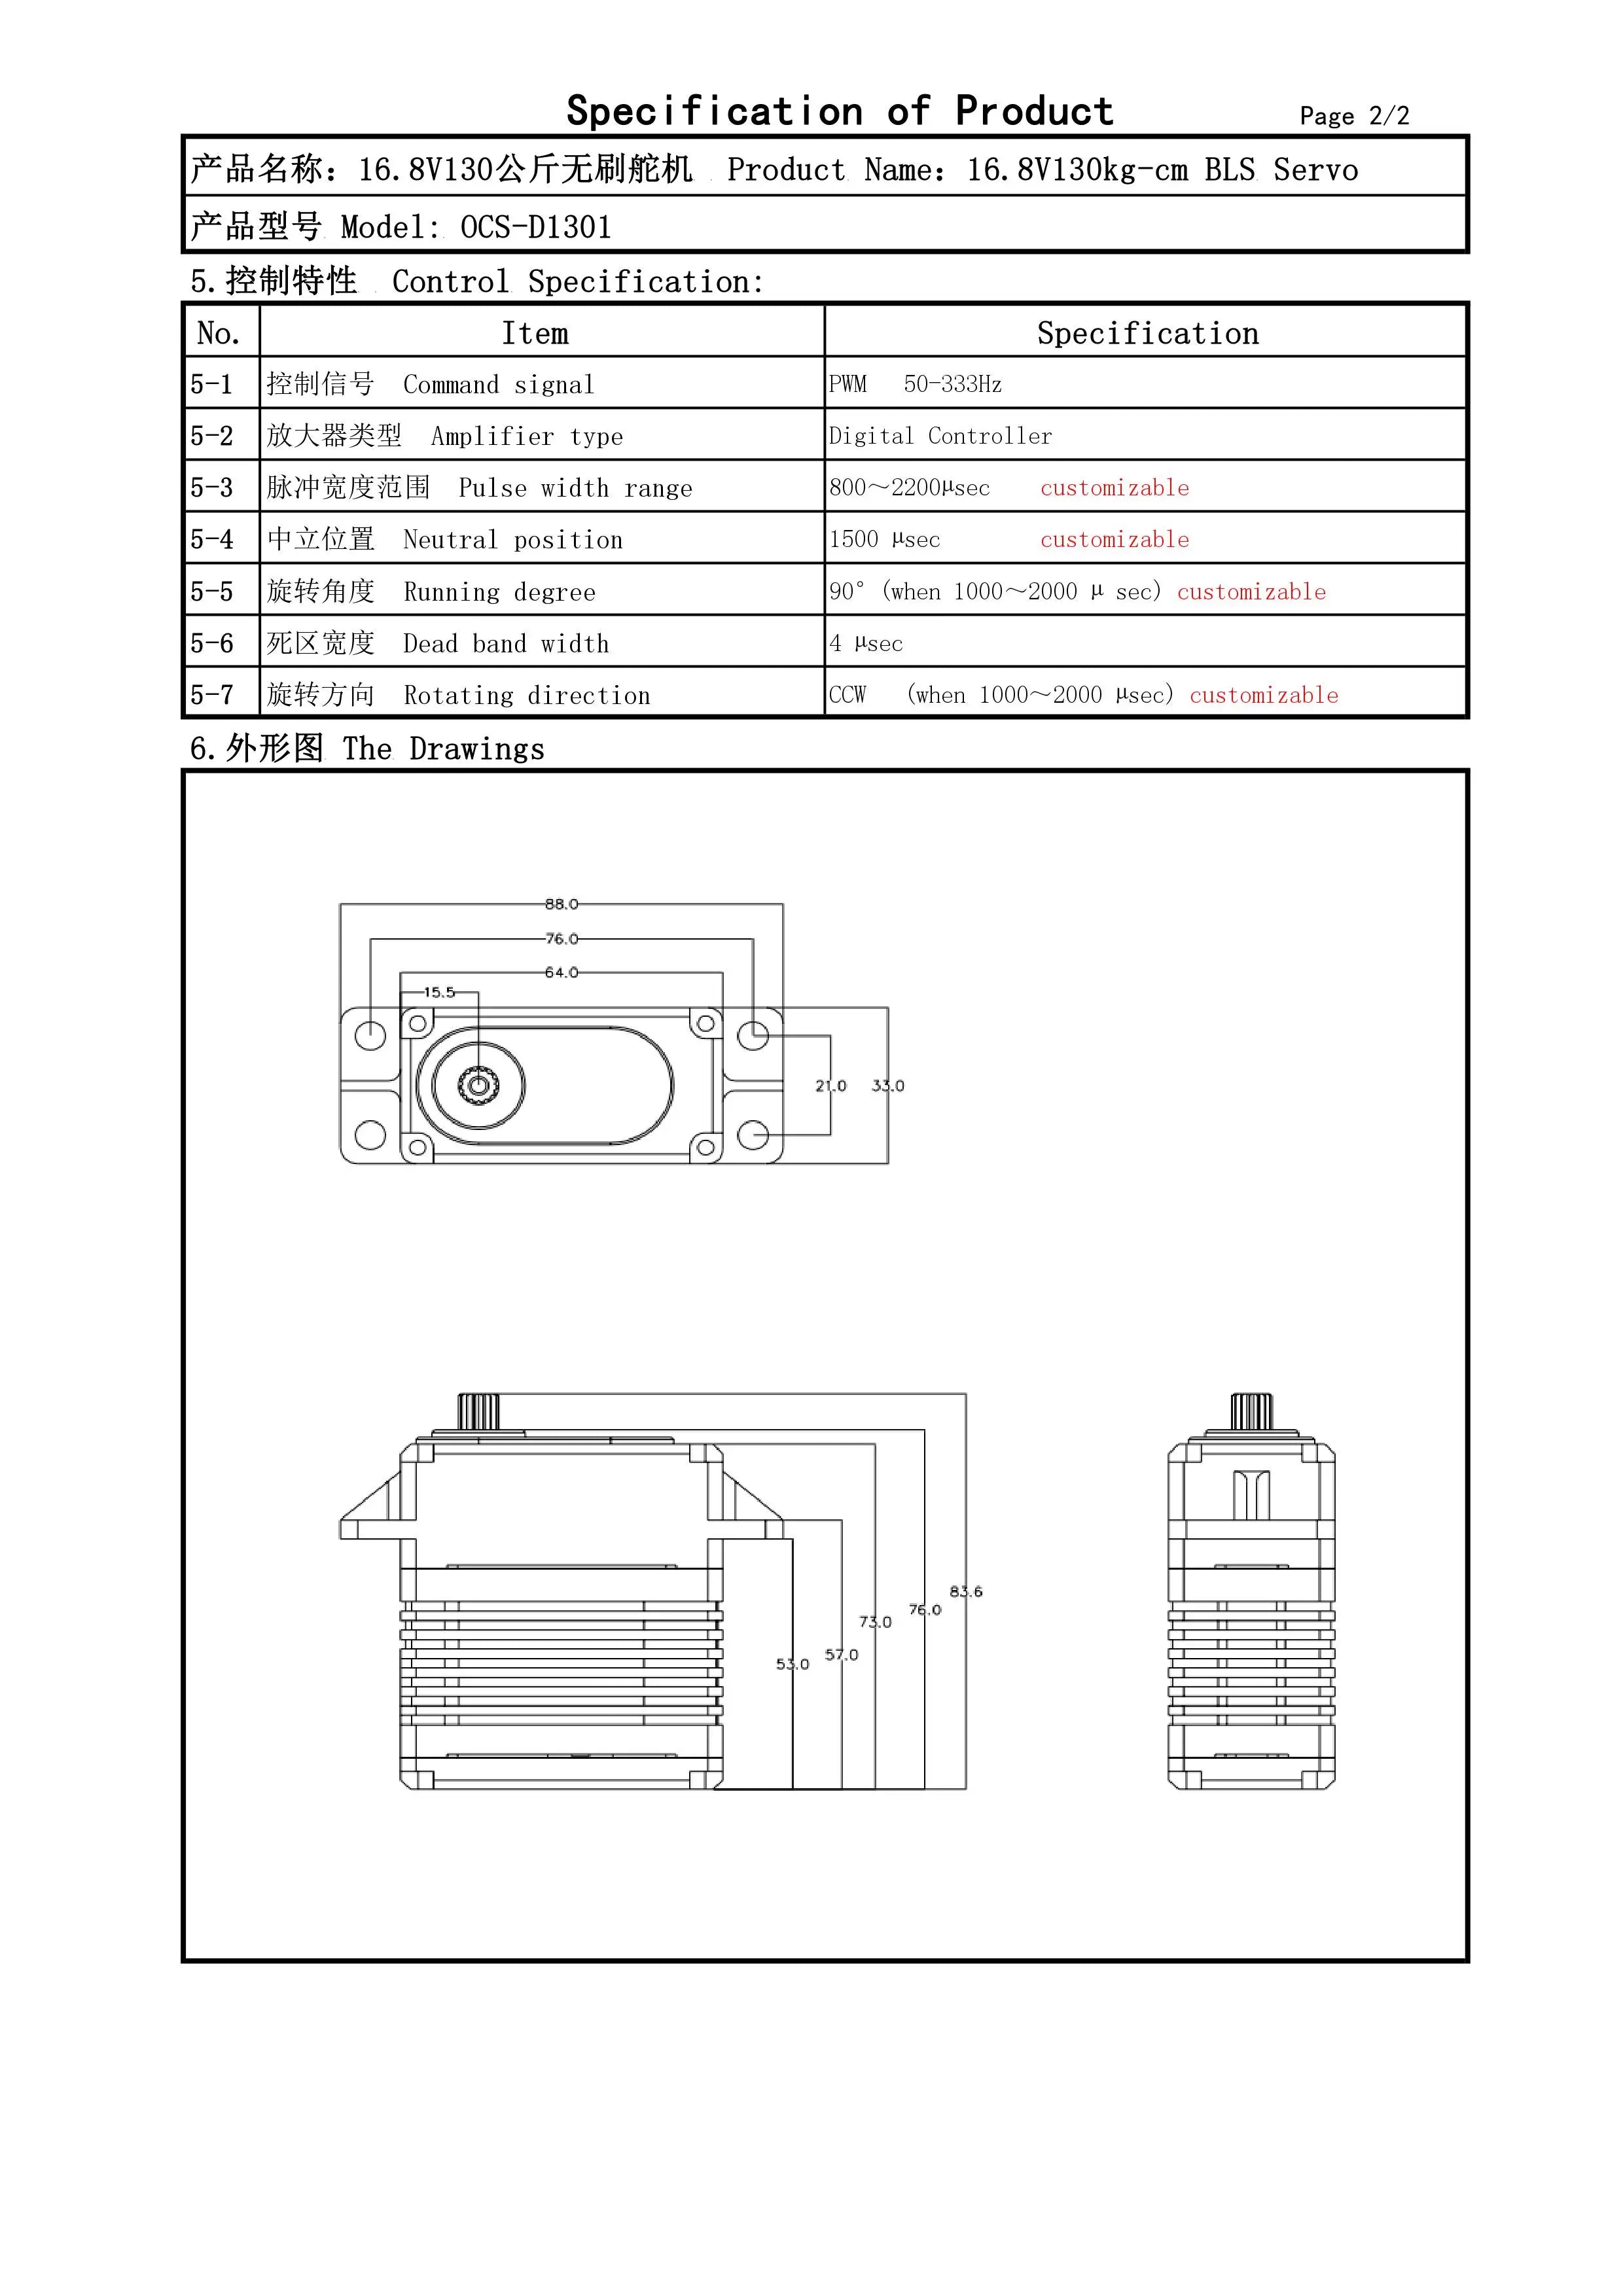 OCServo, m#tmt Control Specification: No_ Item Specification 5-1 +